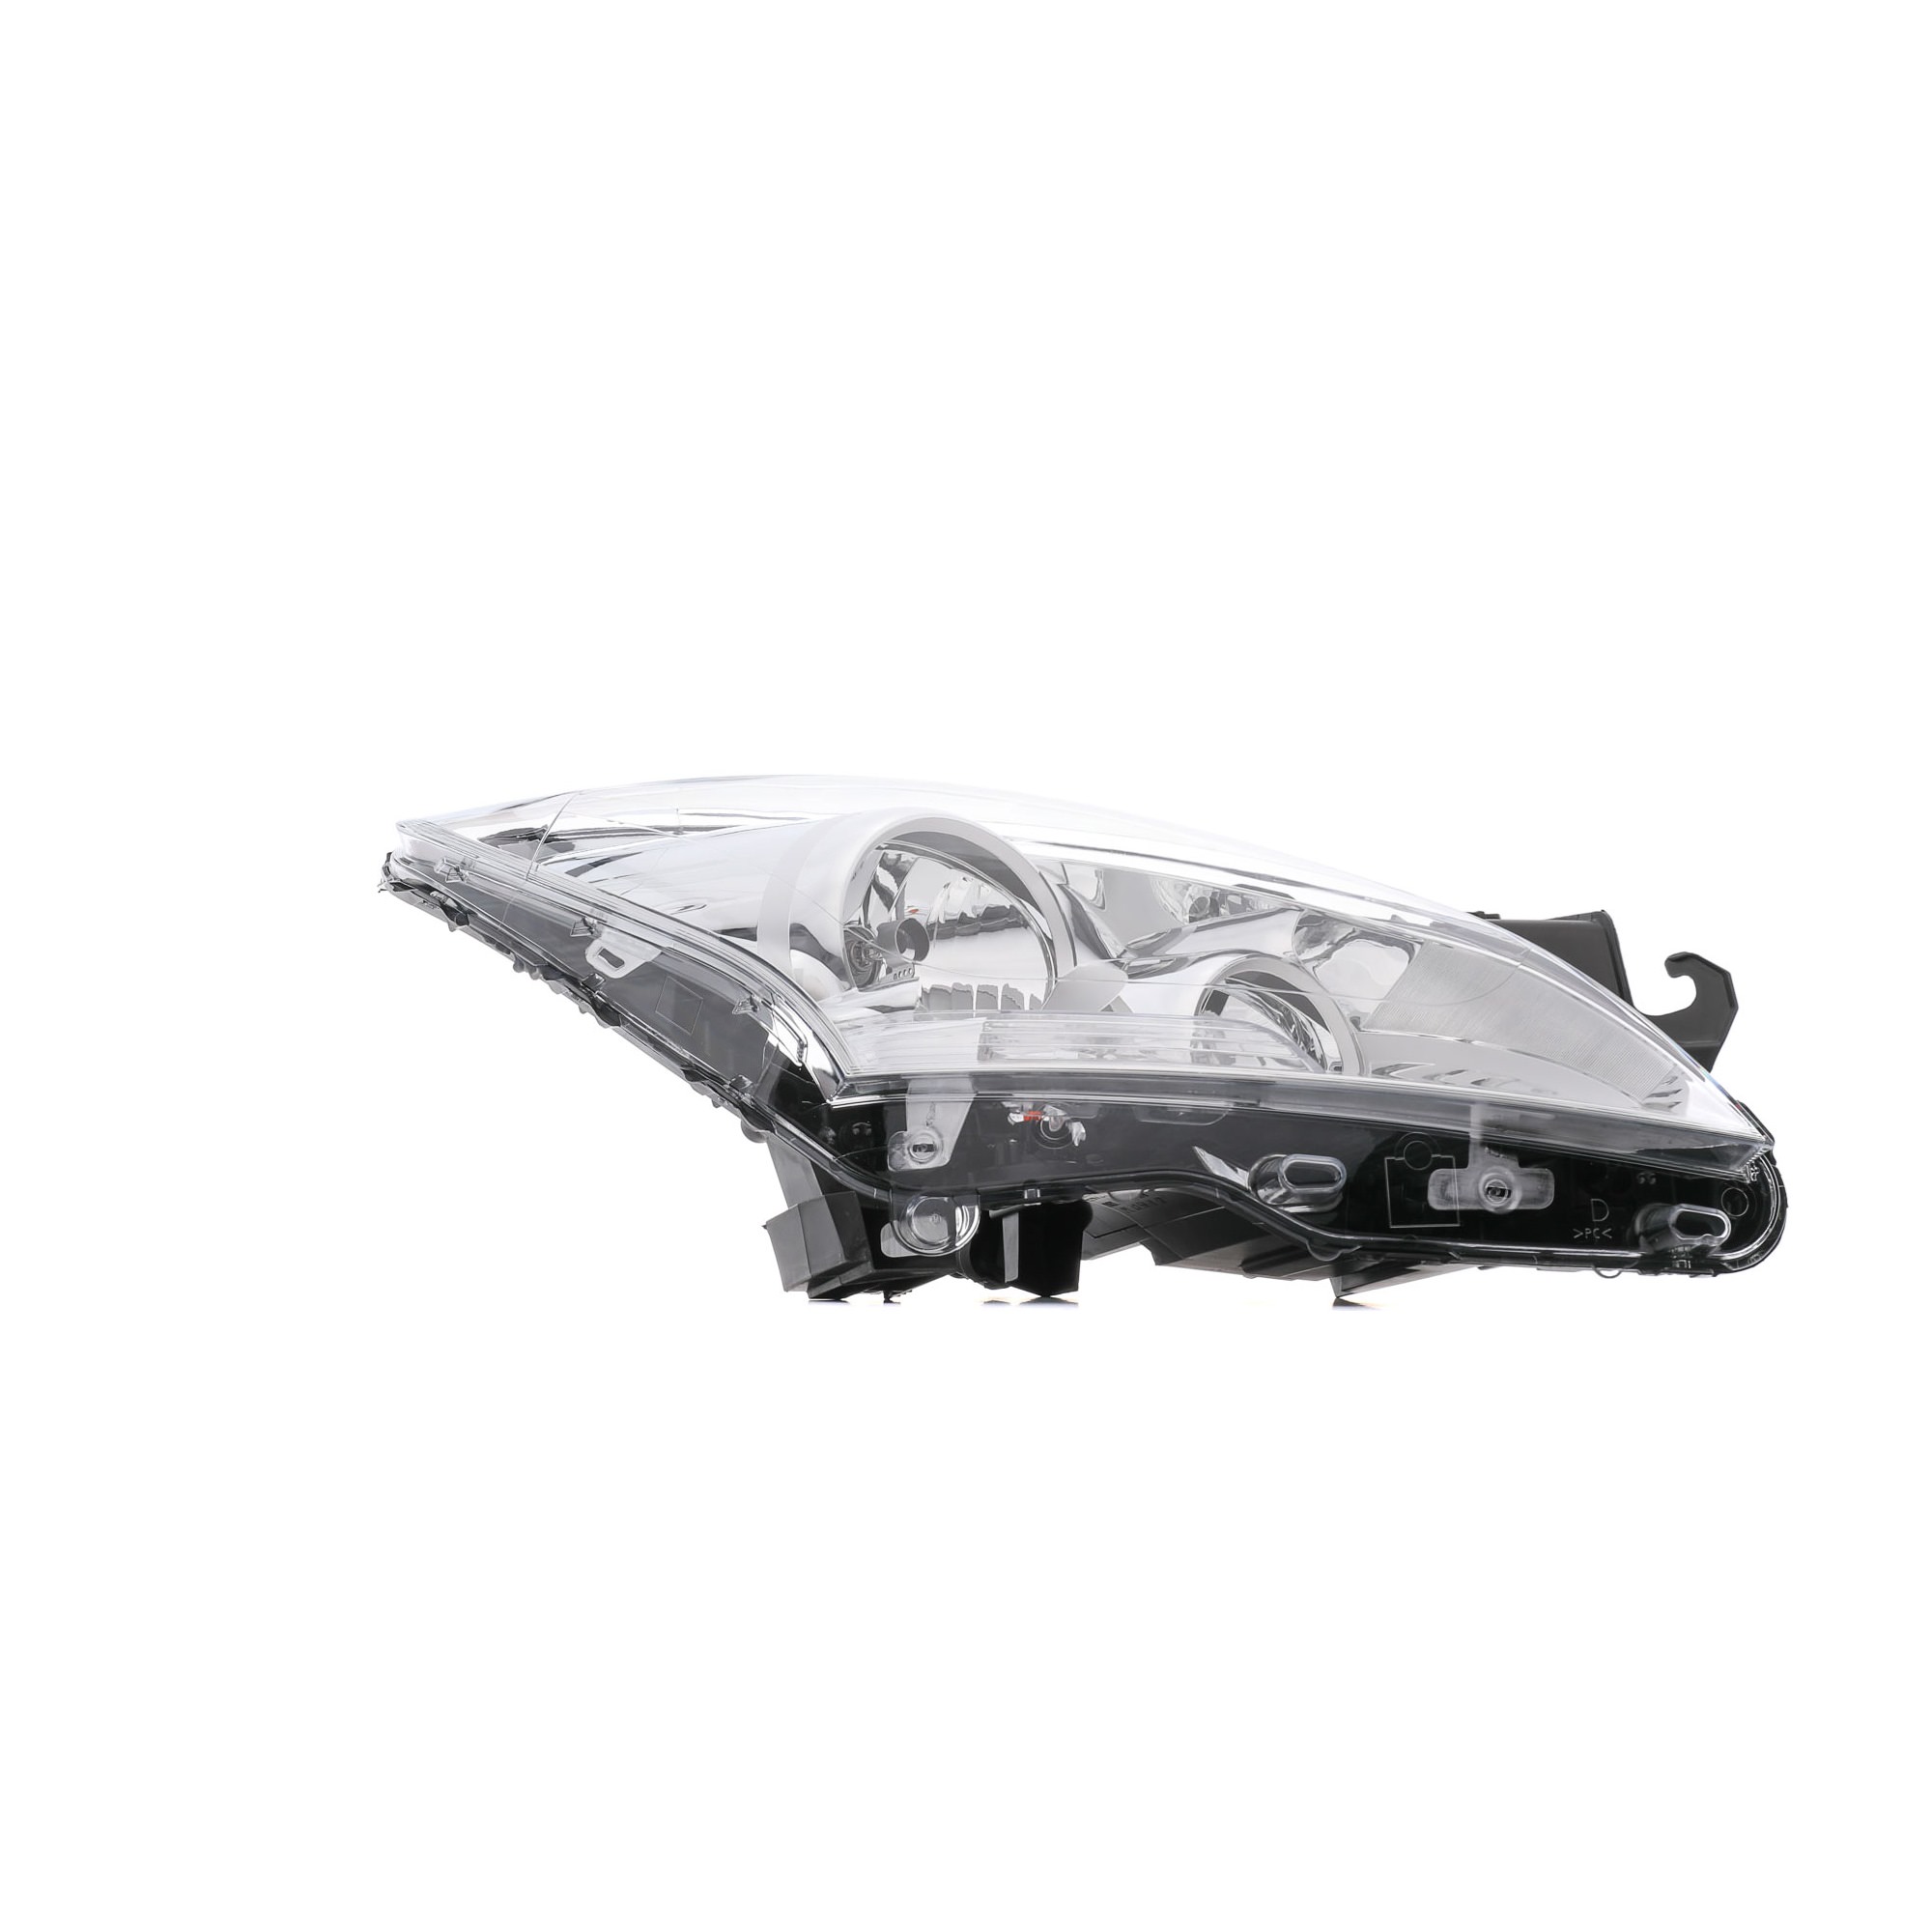 043785 VALEO Headlight IVECO Right, H7, Halogen, transparent, with low beam, with daytime running light, for right-hand traffic, ORIGINAL PART, with motor for headlamp levelling